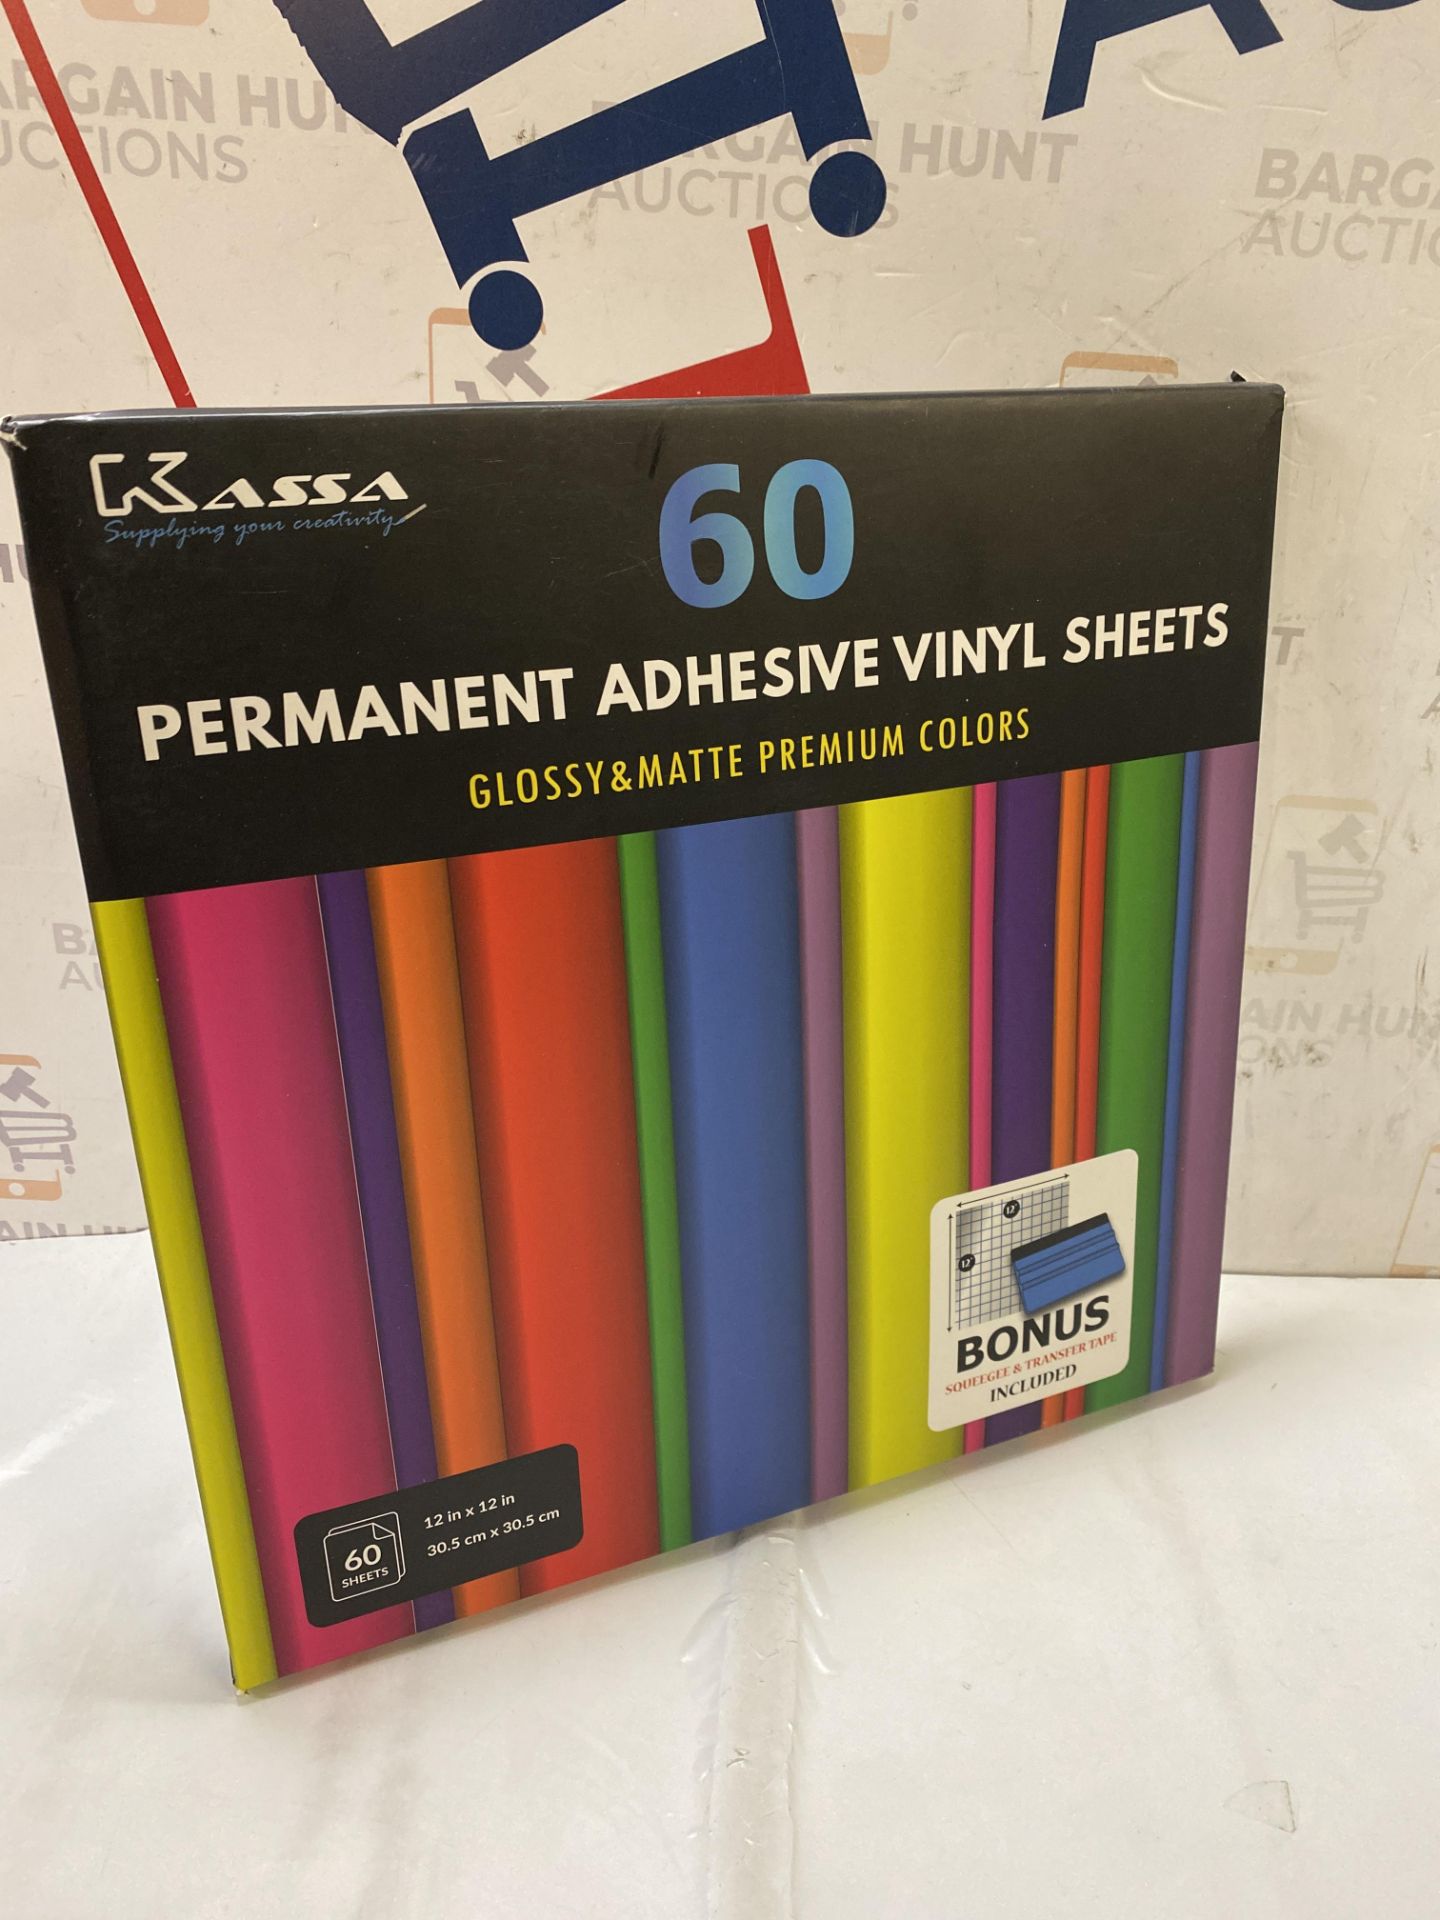 RRP £20.99 Kassa Permanent Adhesive Vinyl Sheets - Bundle of Assorted Colors (Matte & Glossy) - - Image 2 of 2